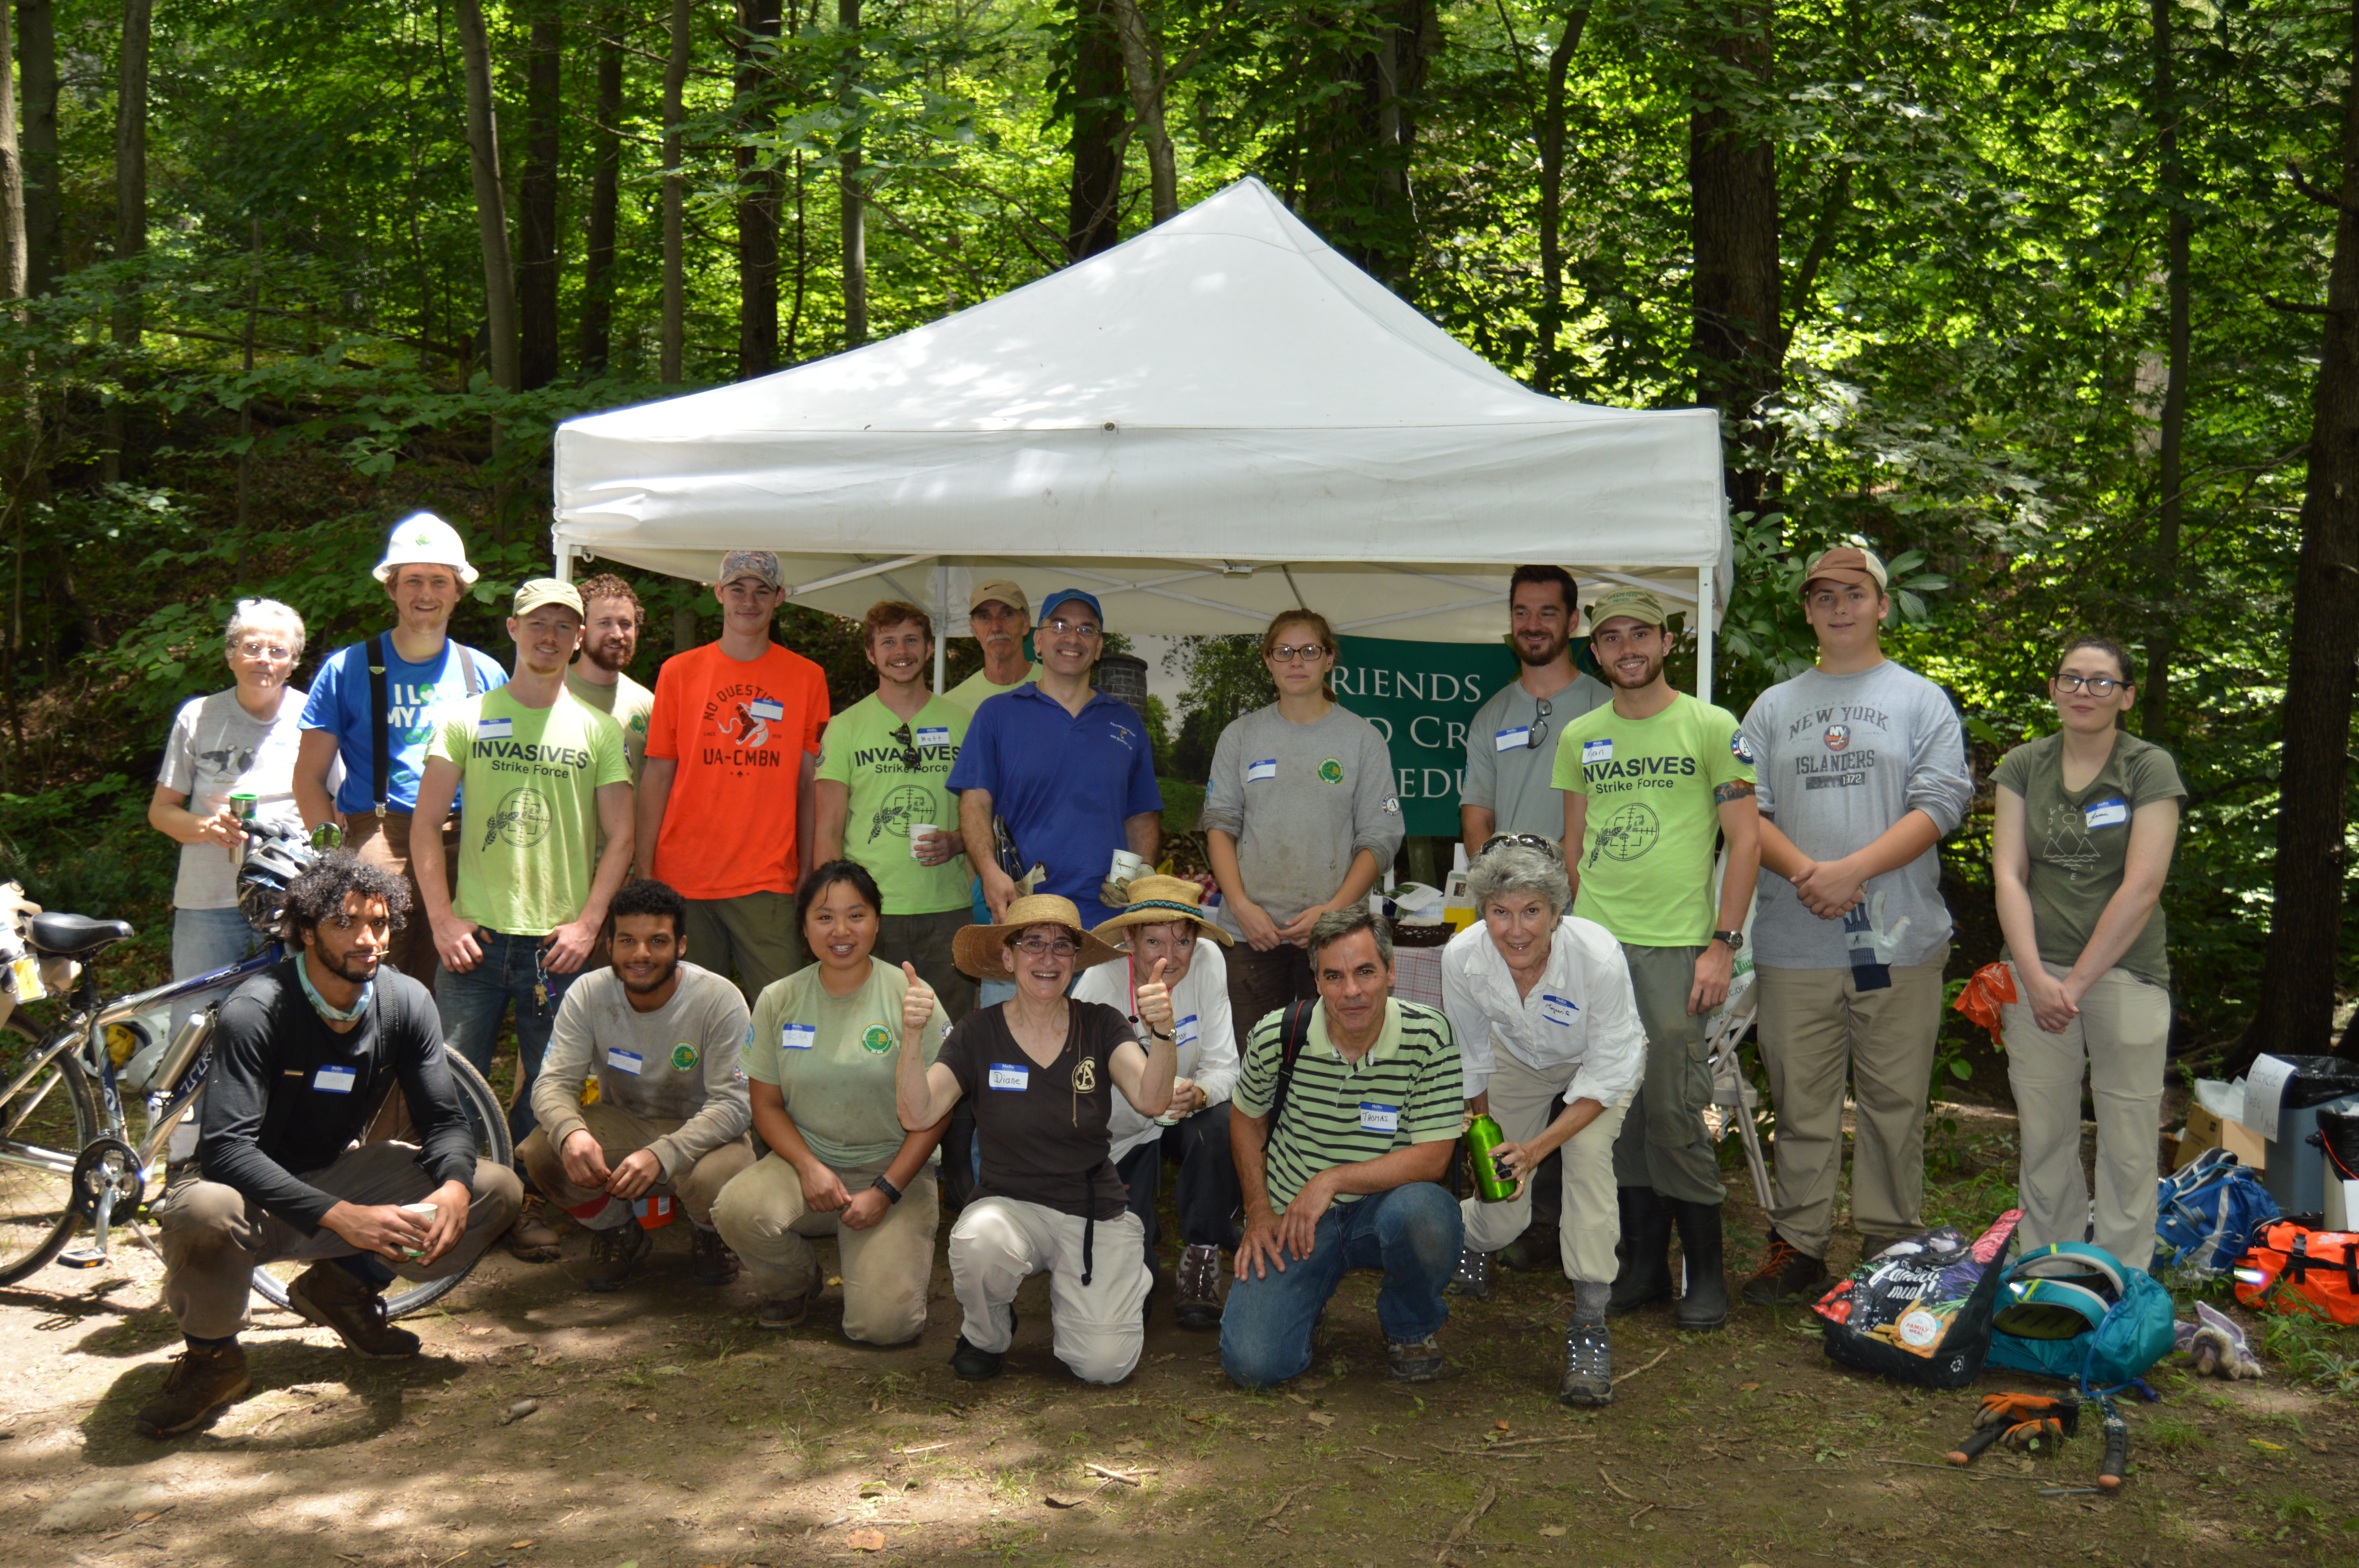 Group photo of ISF Crew, NYS Excelsior Crew and volunteers at Old Croton Aqueduct State Historic Park. Photo by Daniel Pollard.